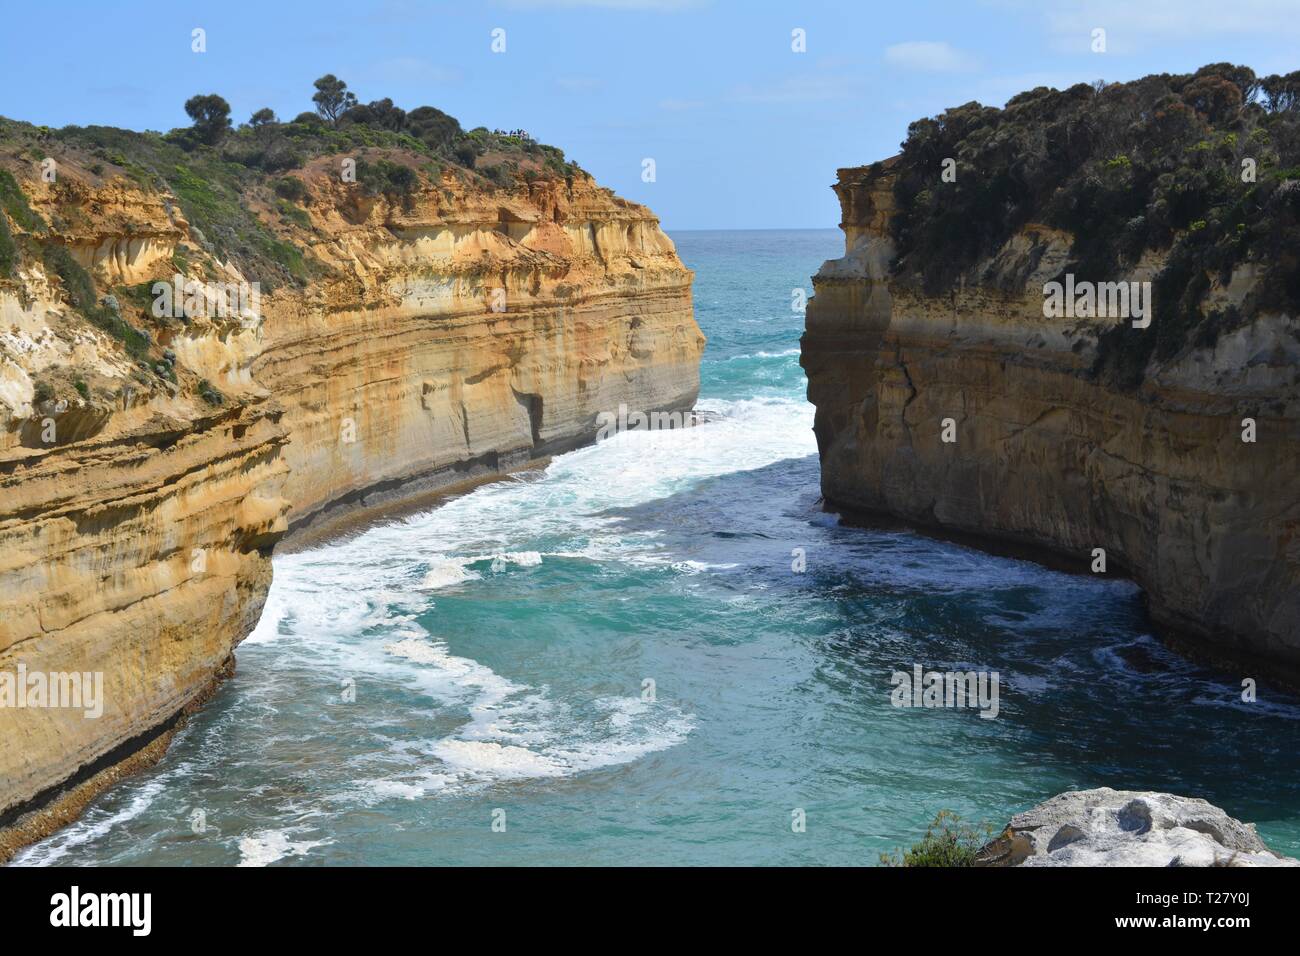 Loch Ard Gorge is a stunning tourist attraction along the Great Ocean Road featuring a beautiful beach located 3 mins away from The Twelve Apostles. Stock Photo